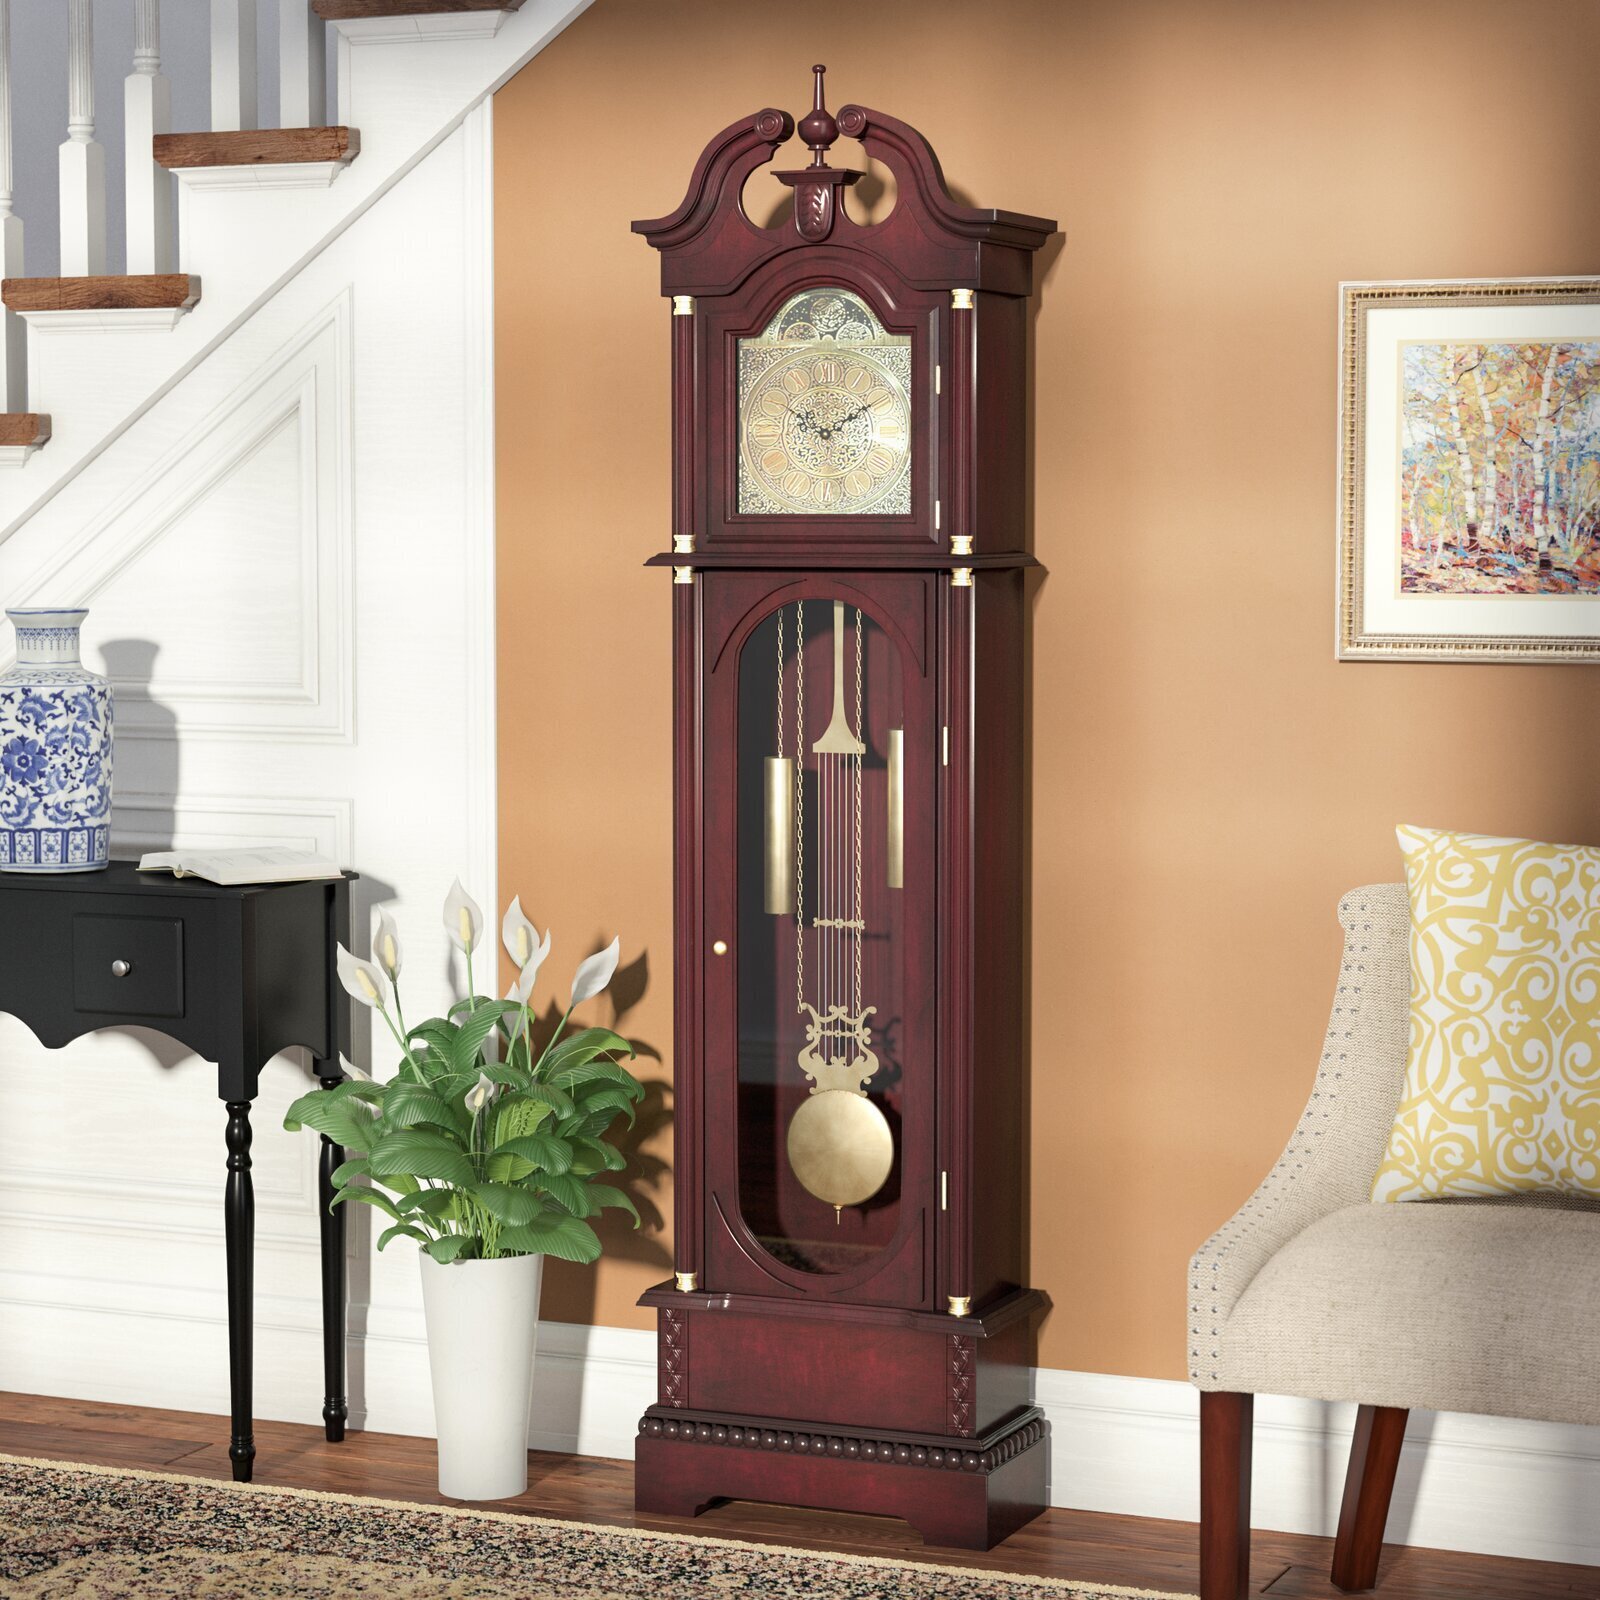 Old fashioned floor standing clock